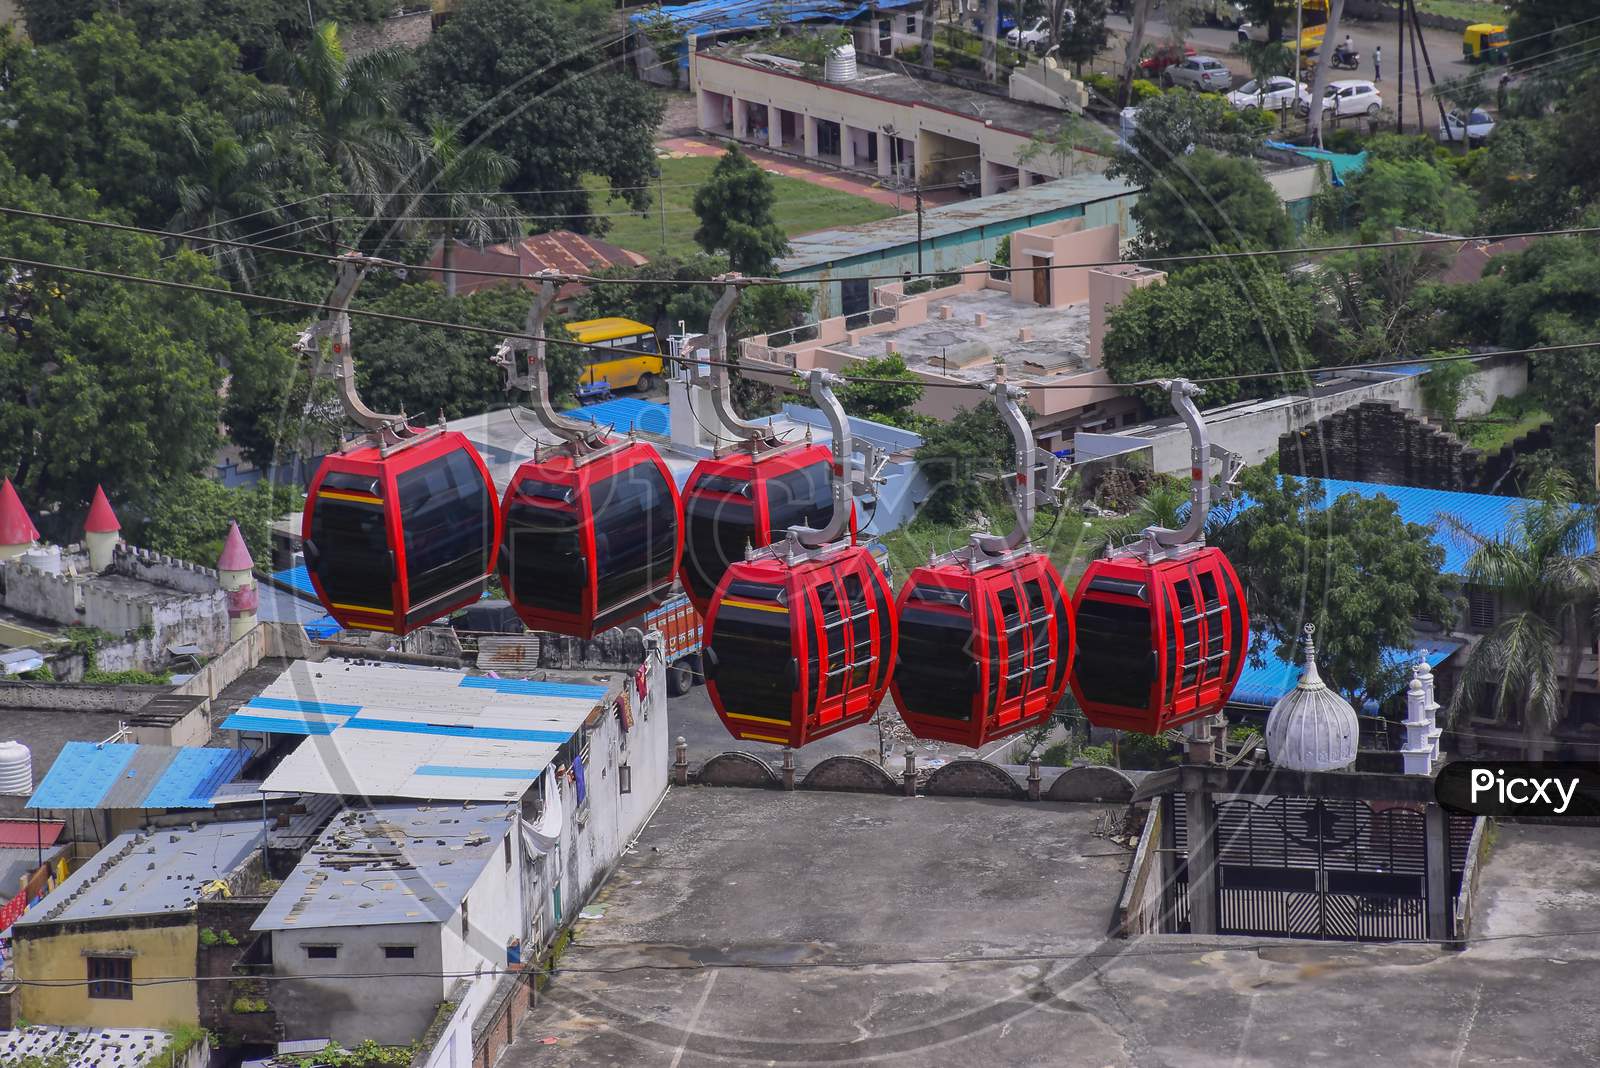 Beautiful View Of Dewas City And Rope-Way Cable Car, Taken From The Temple Of Maa Chamunda And Maa Tulja Bhavani, Situated On The Hill Of Dewas City.